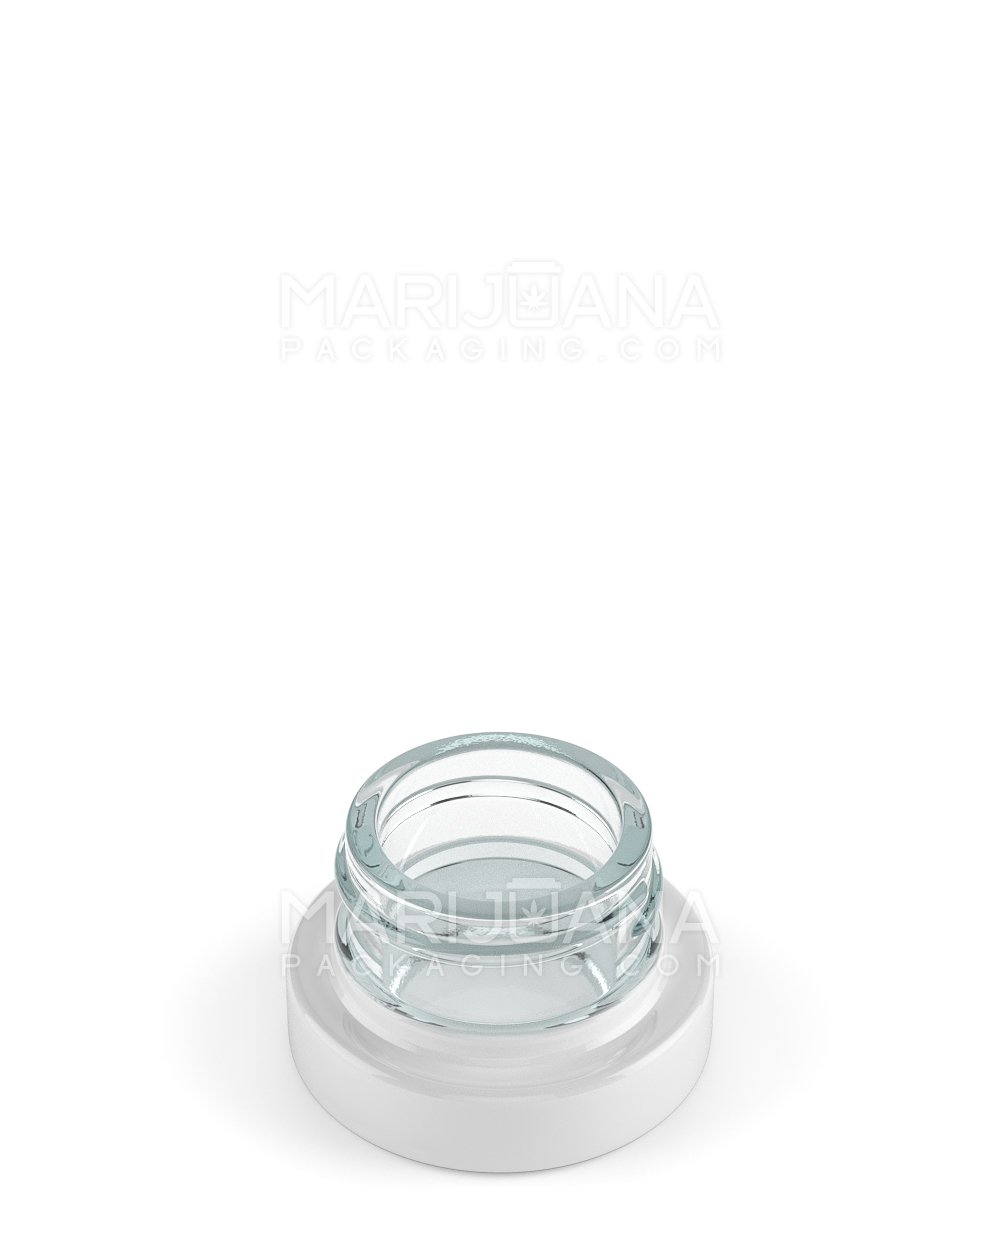 White Glass Concentrate Containers | 28mm - 5mL - 504 Count - 2